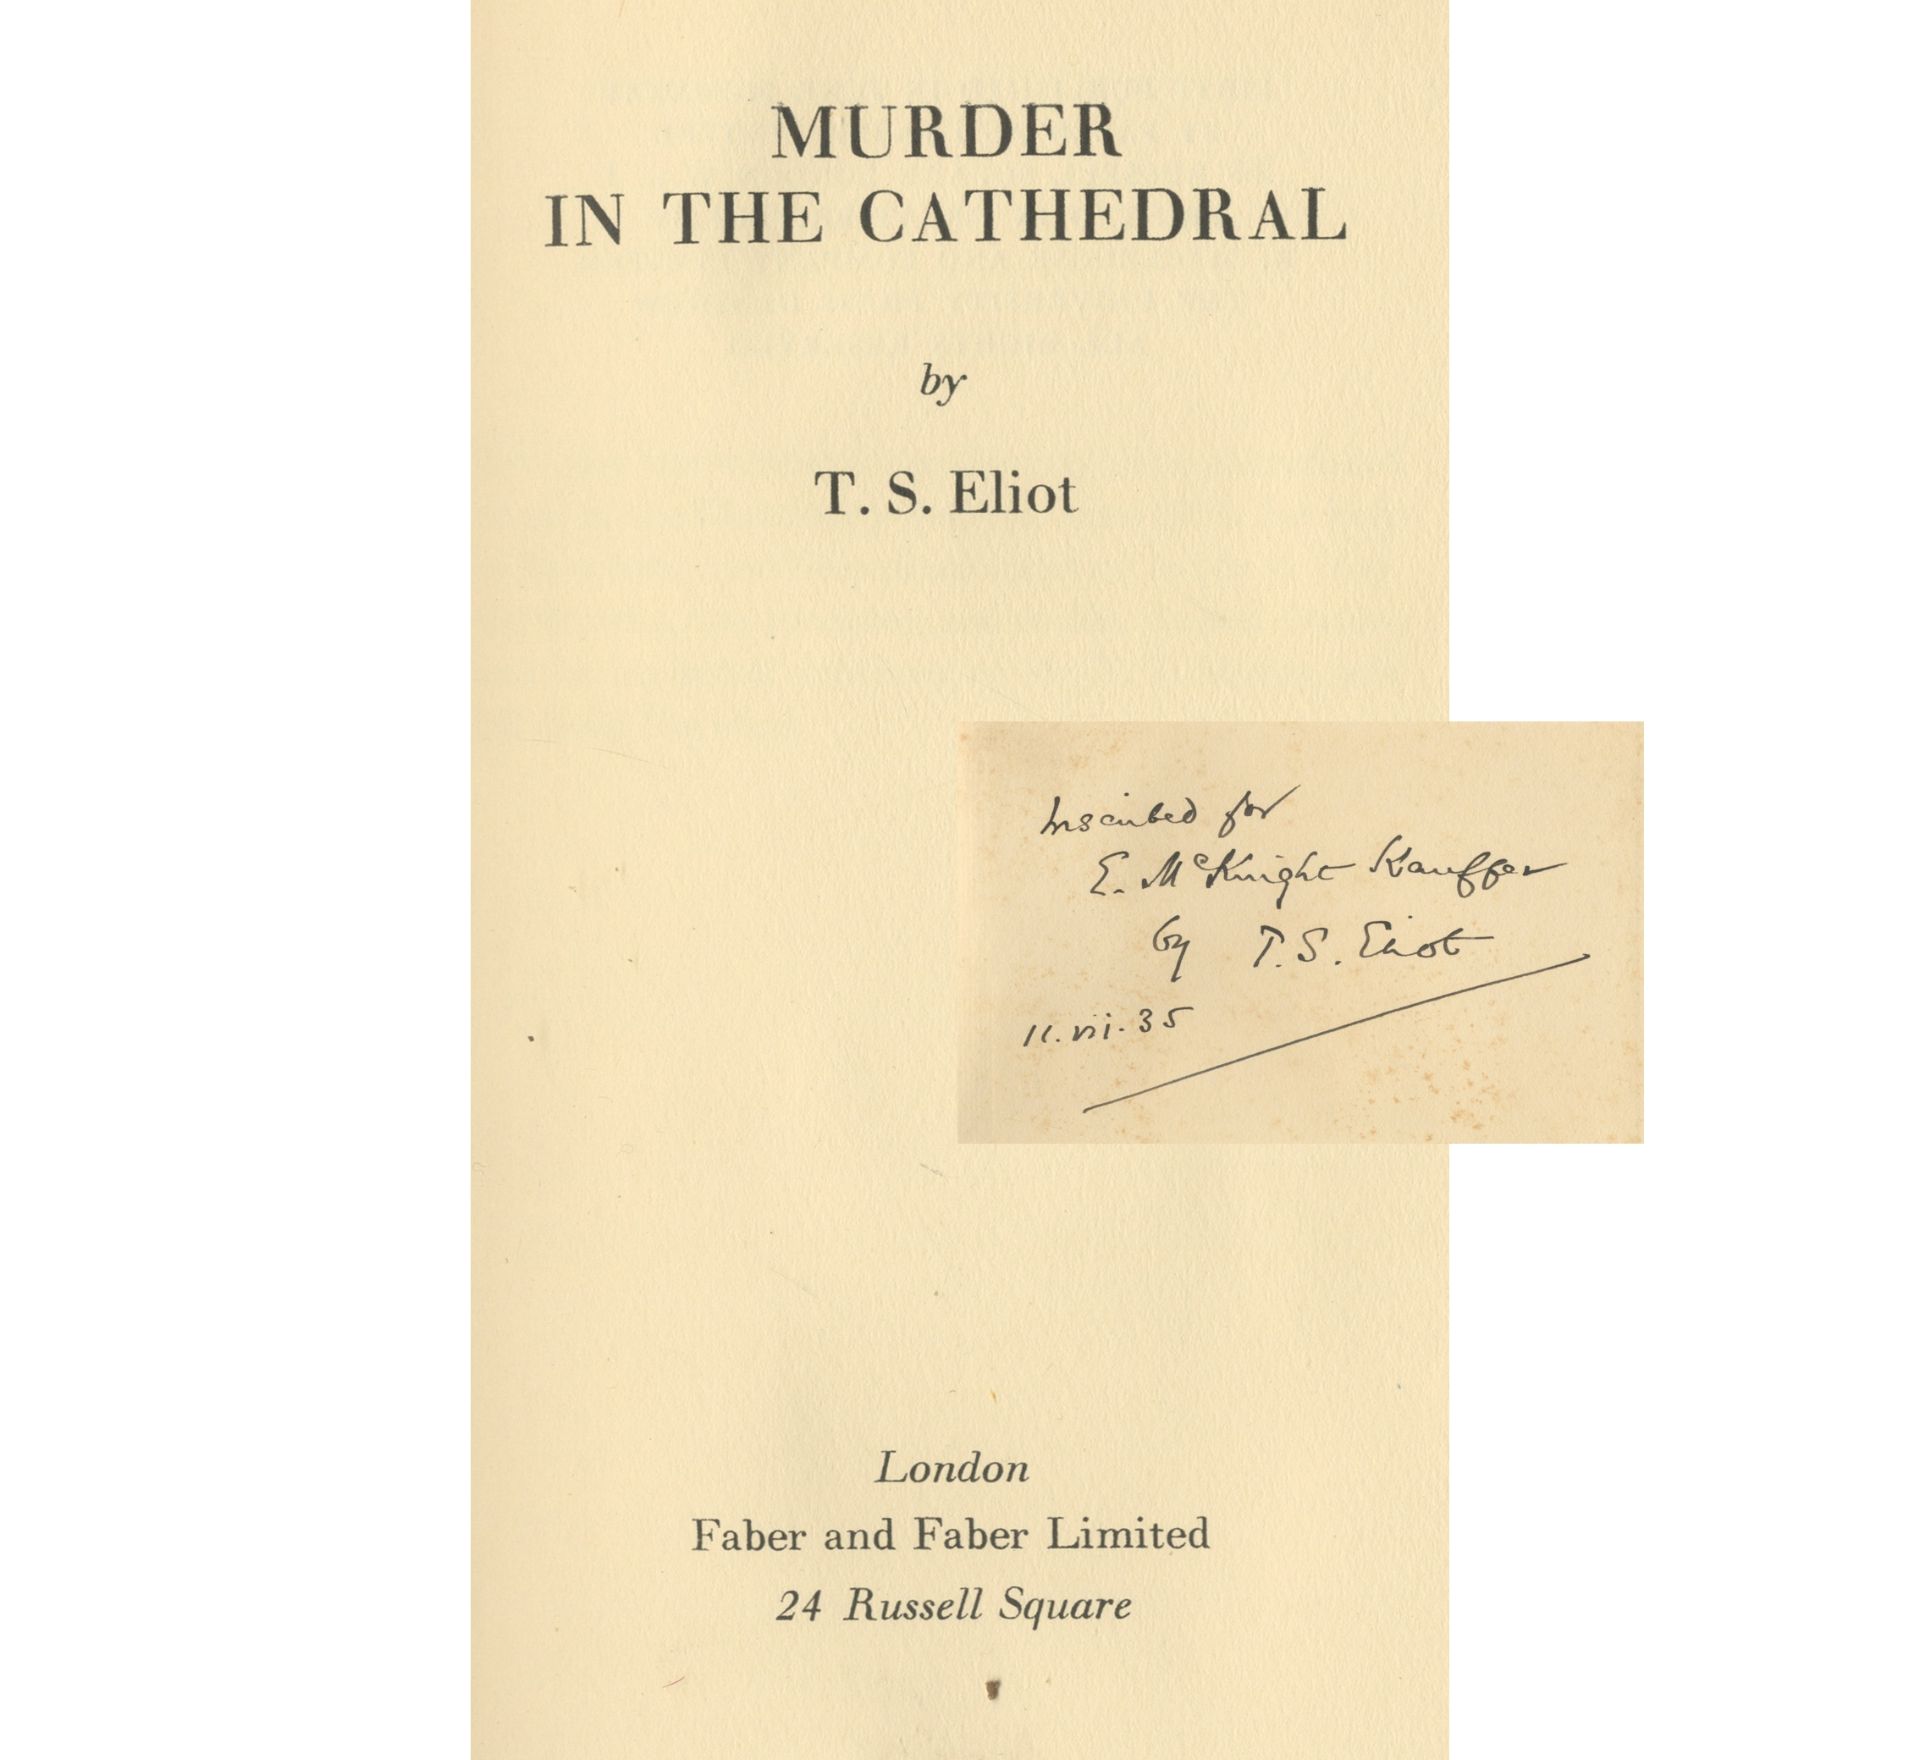 ELIOT (T.S.) Murder in the Cathedral, FIRST EDITION, AUTHOR'S PRESENTATION COPY TO E. McKNIGHT KA...